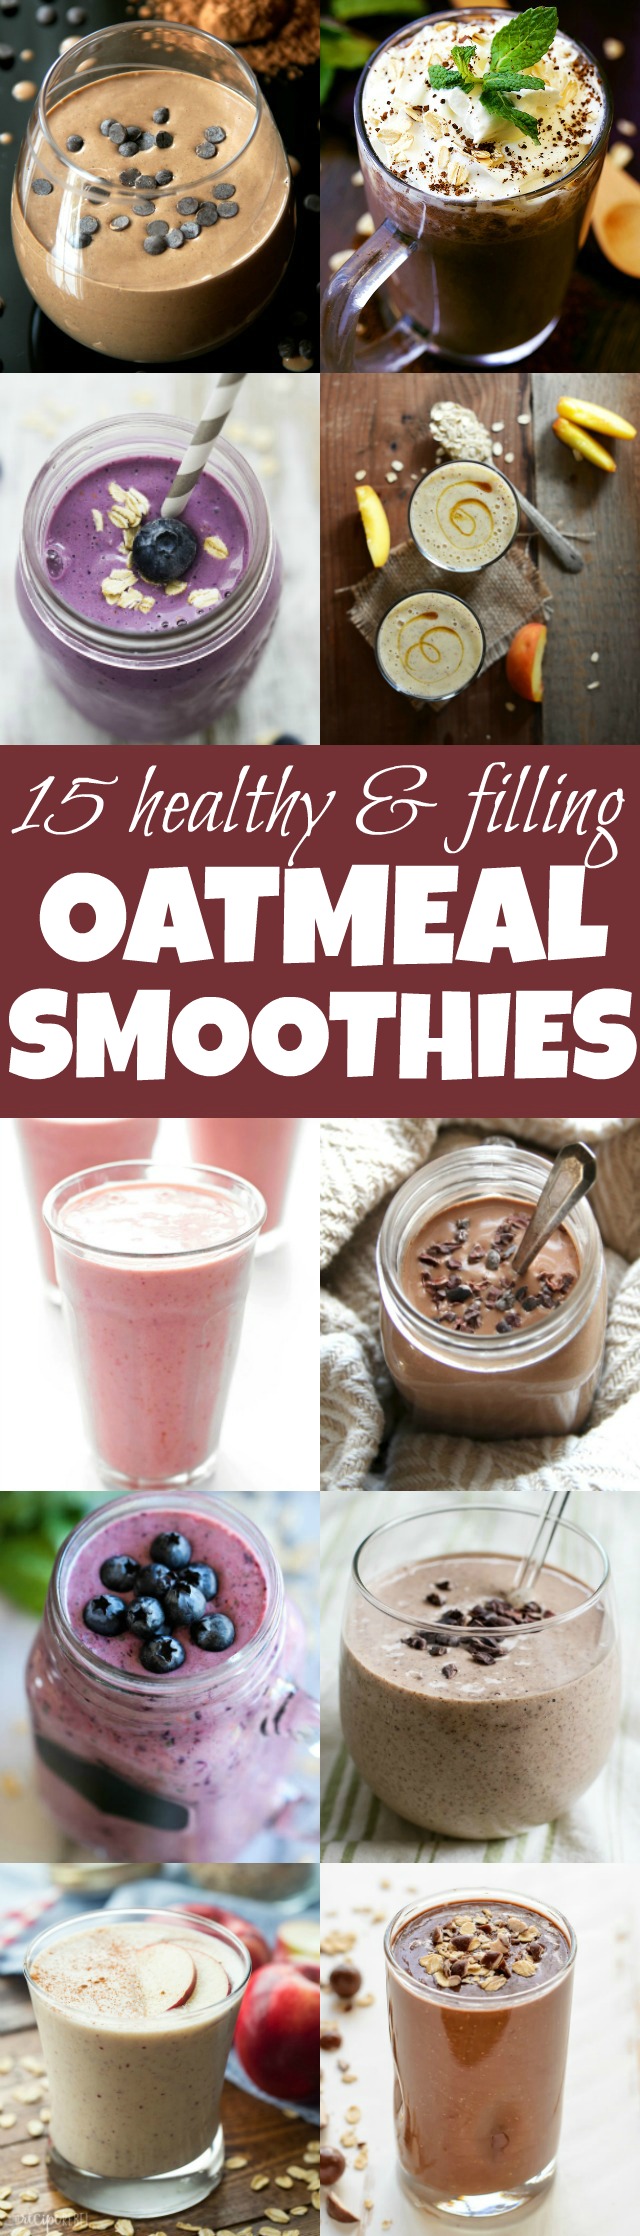 Add some extra staying power and nutrition to your smoothies with these healthy oatmeal smoothie recipes!